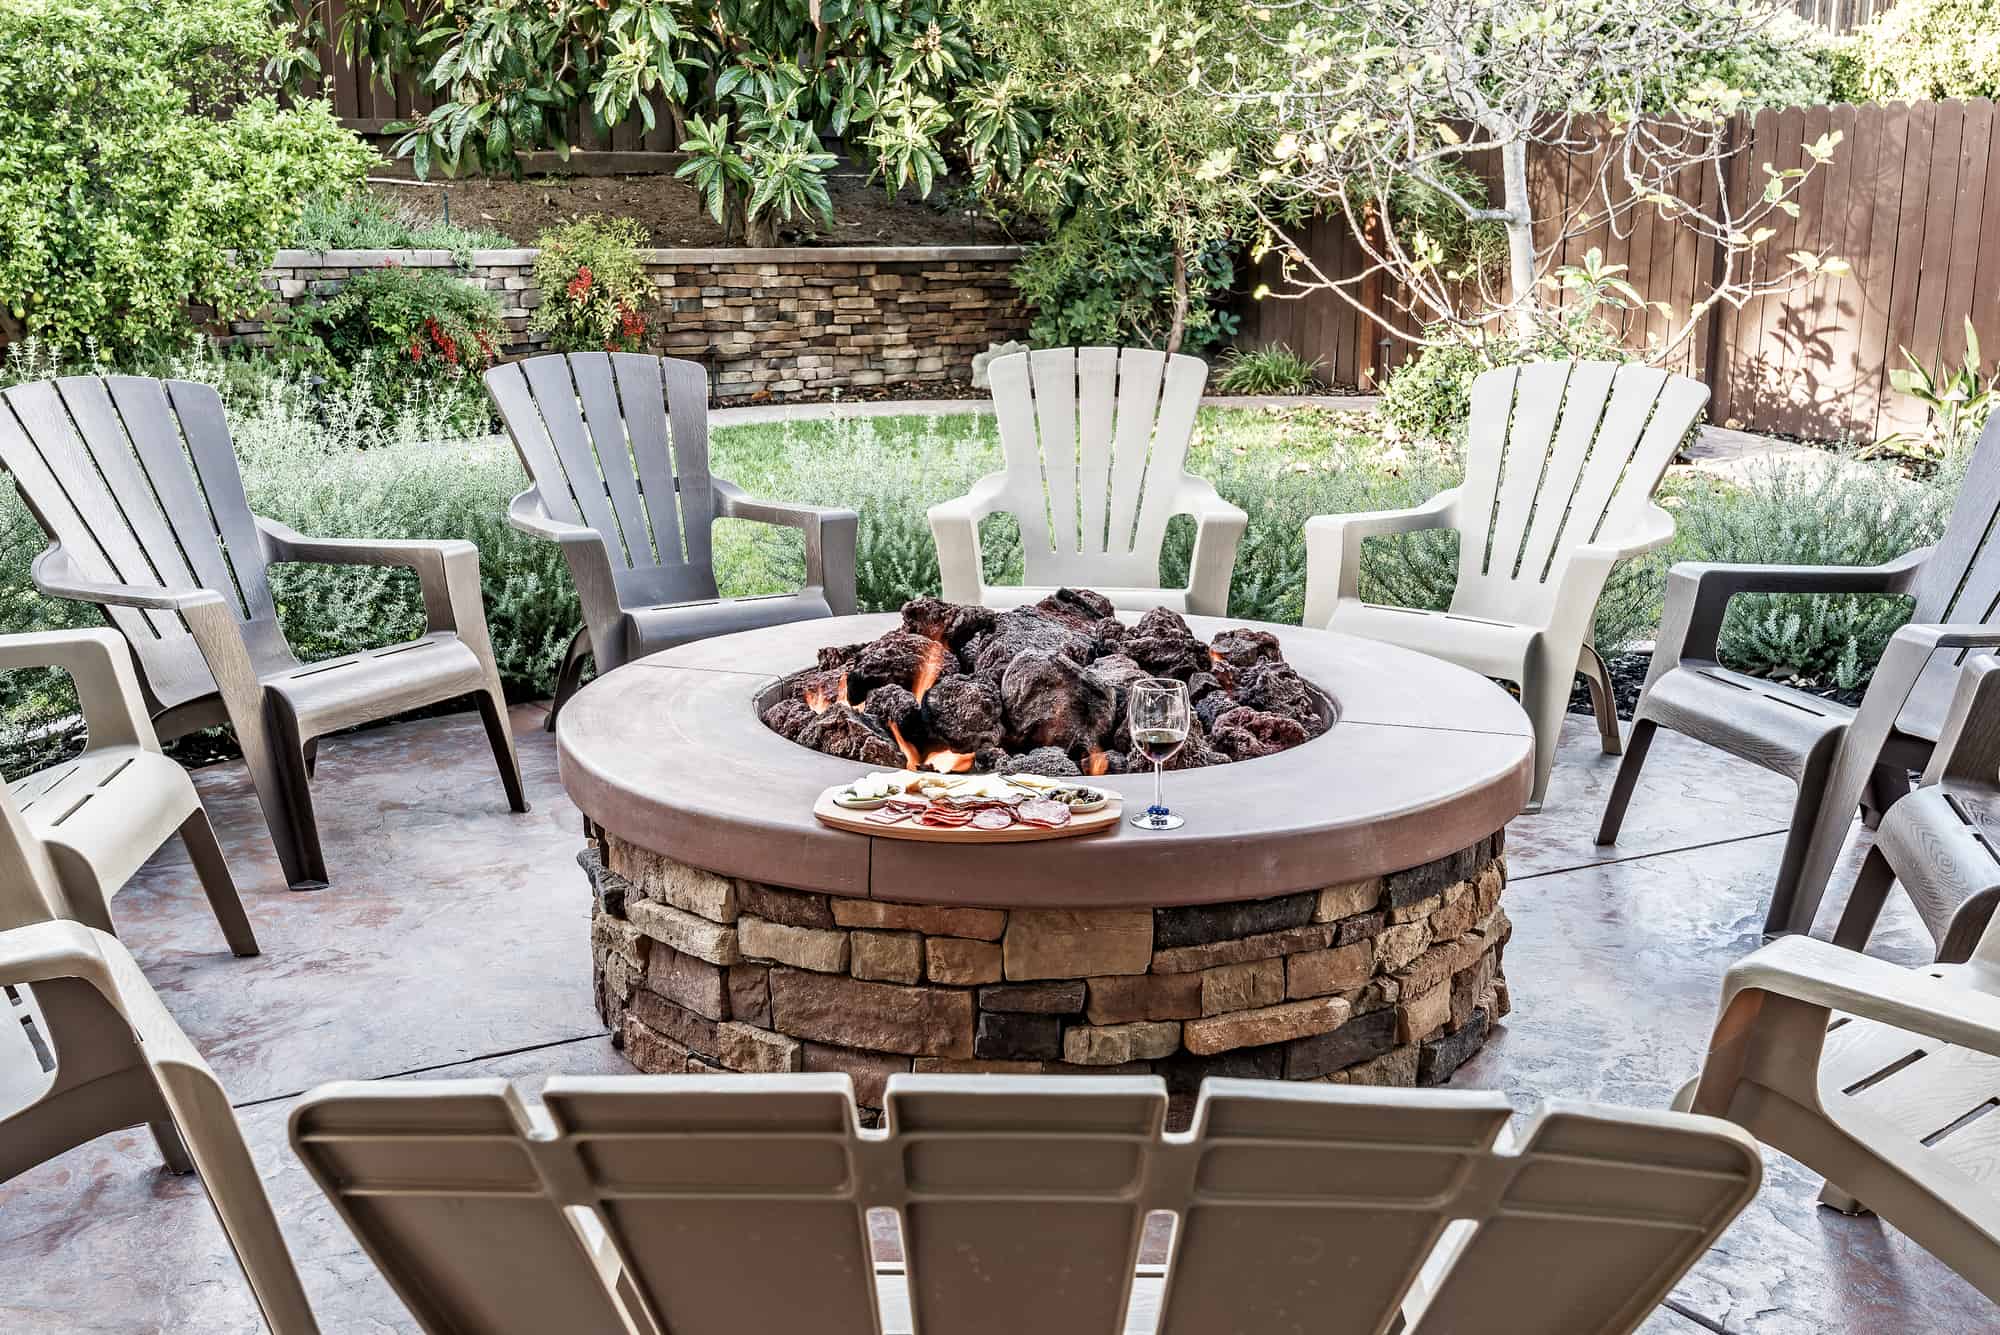 Can I Burn Wood In A Gas Fire Pit, Wood Gas Fire Pit